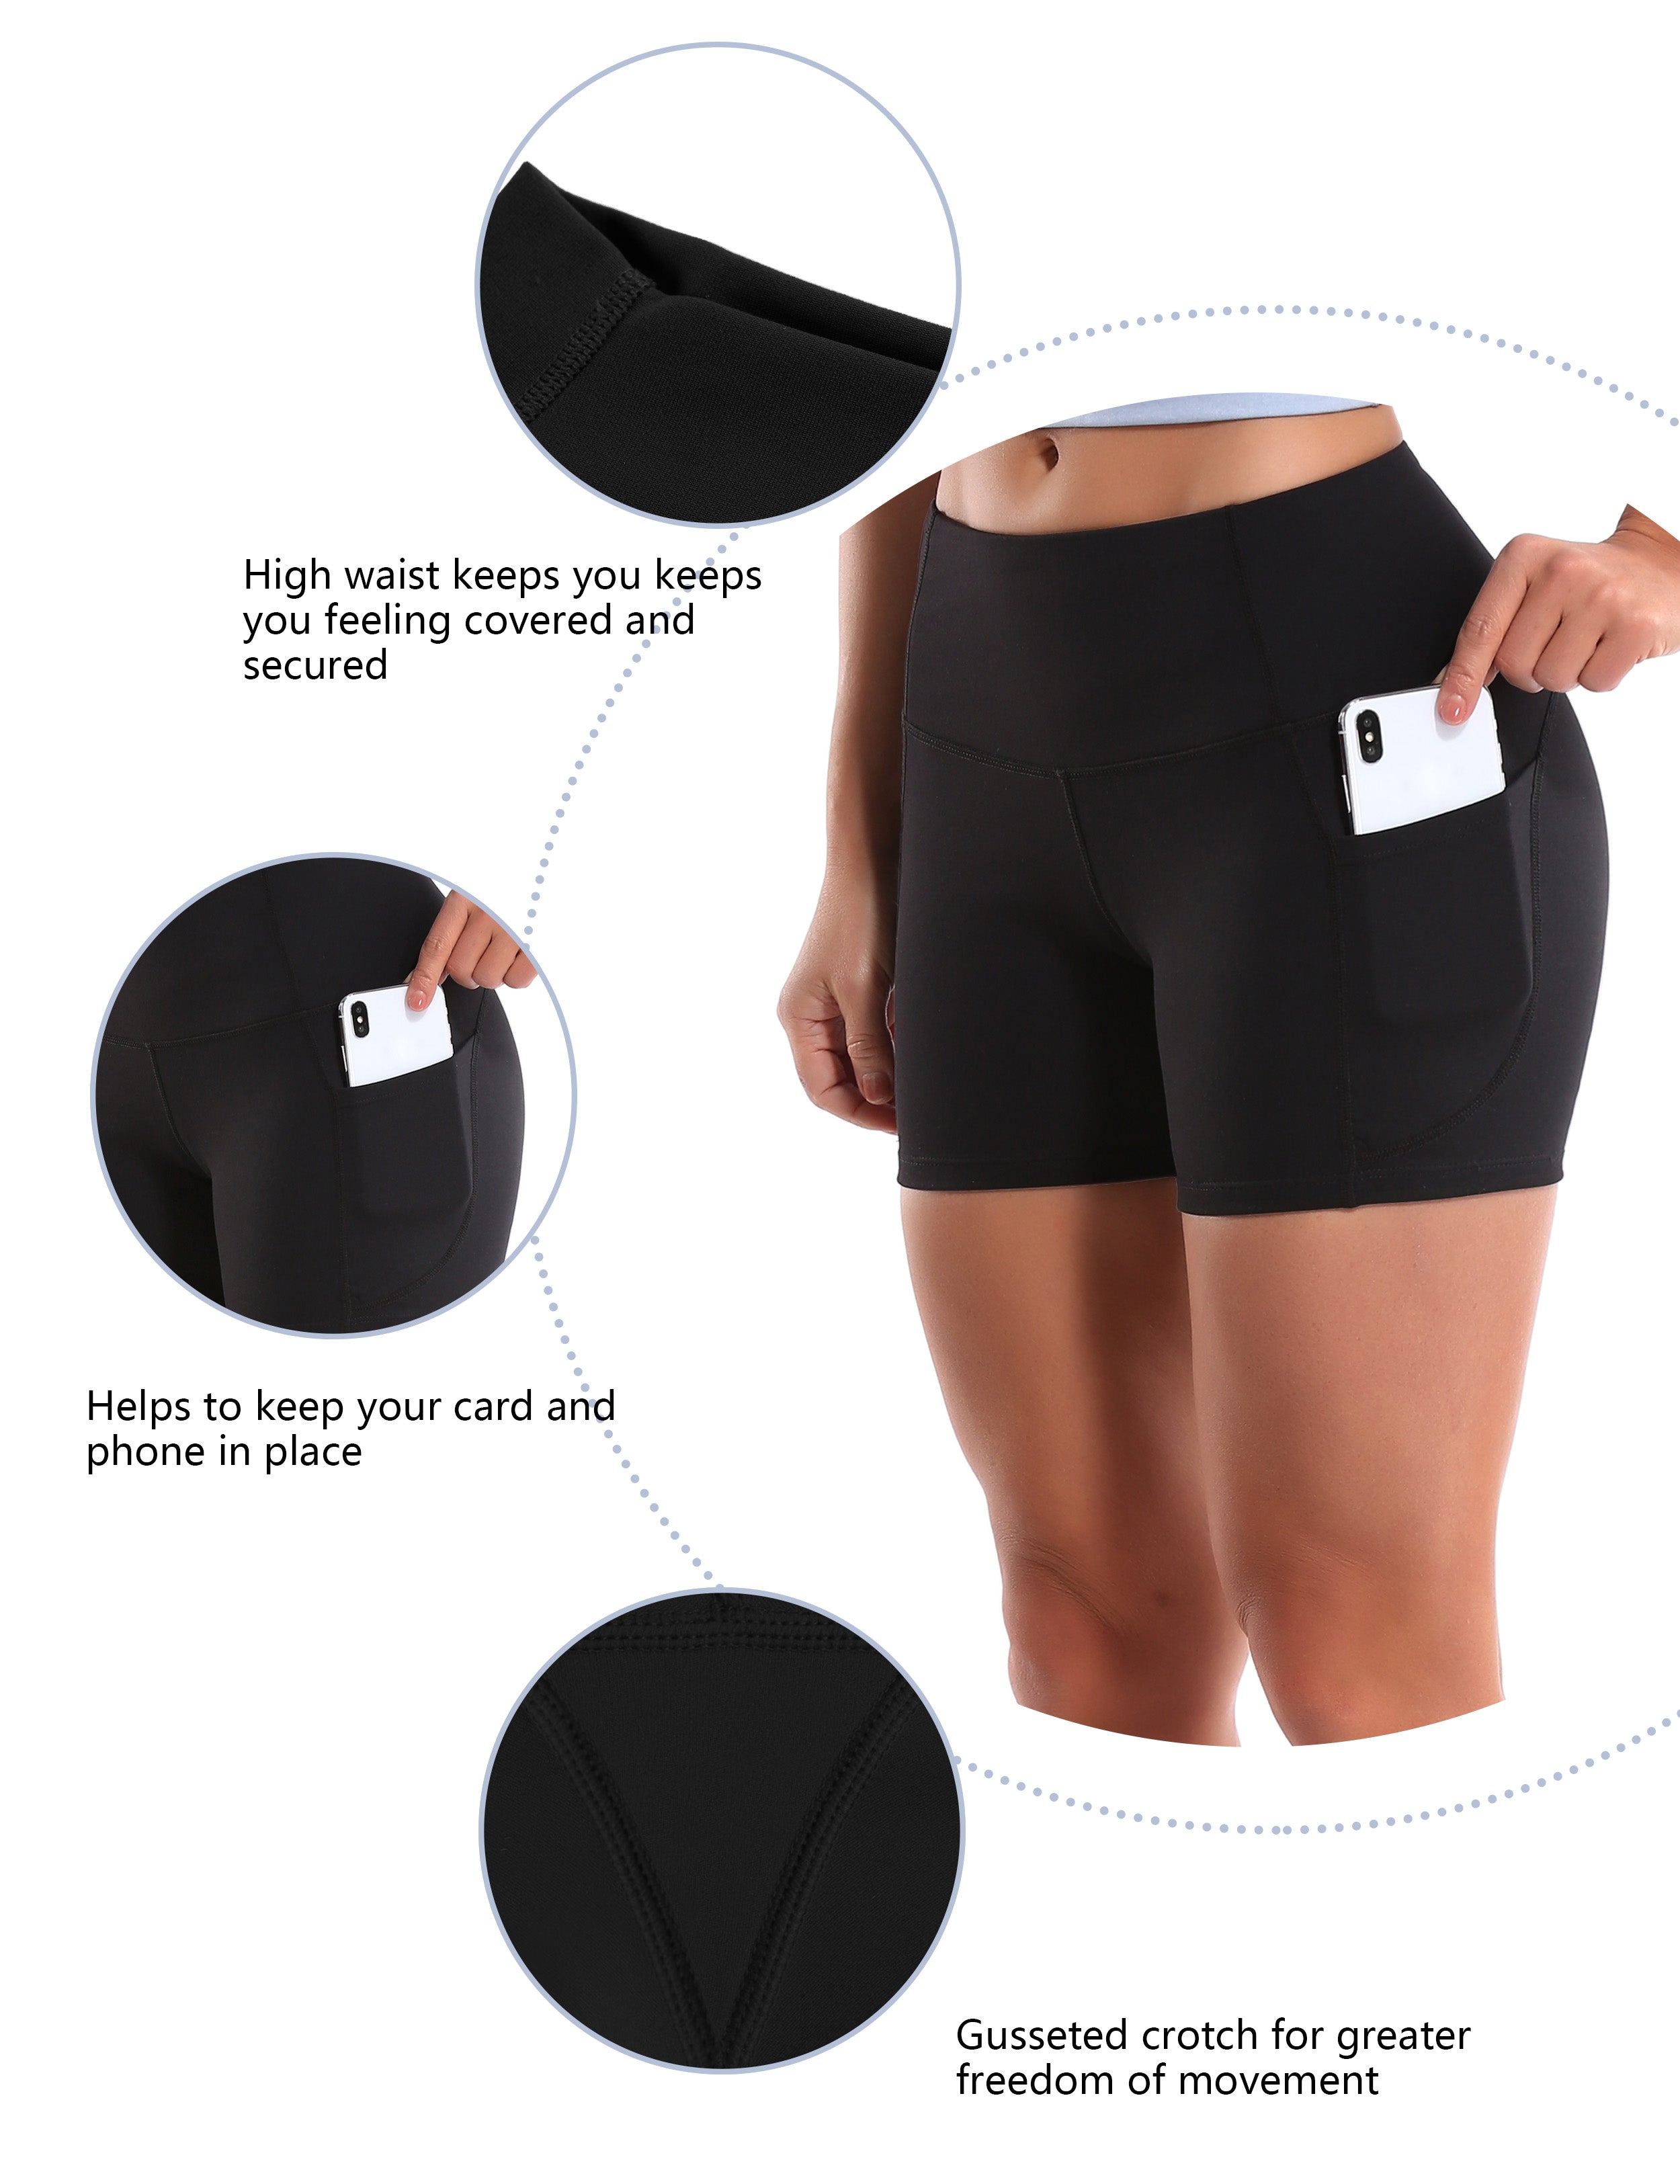 High Waist Side Pockets Jogging Shorts black Softest-ever fabric High elasticity 4-way stretch Fabric doesn't attract lint easily No see-through Moisture-wicking Machine wash 88% Nylon, 12% Spandex